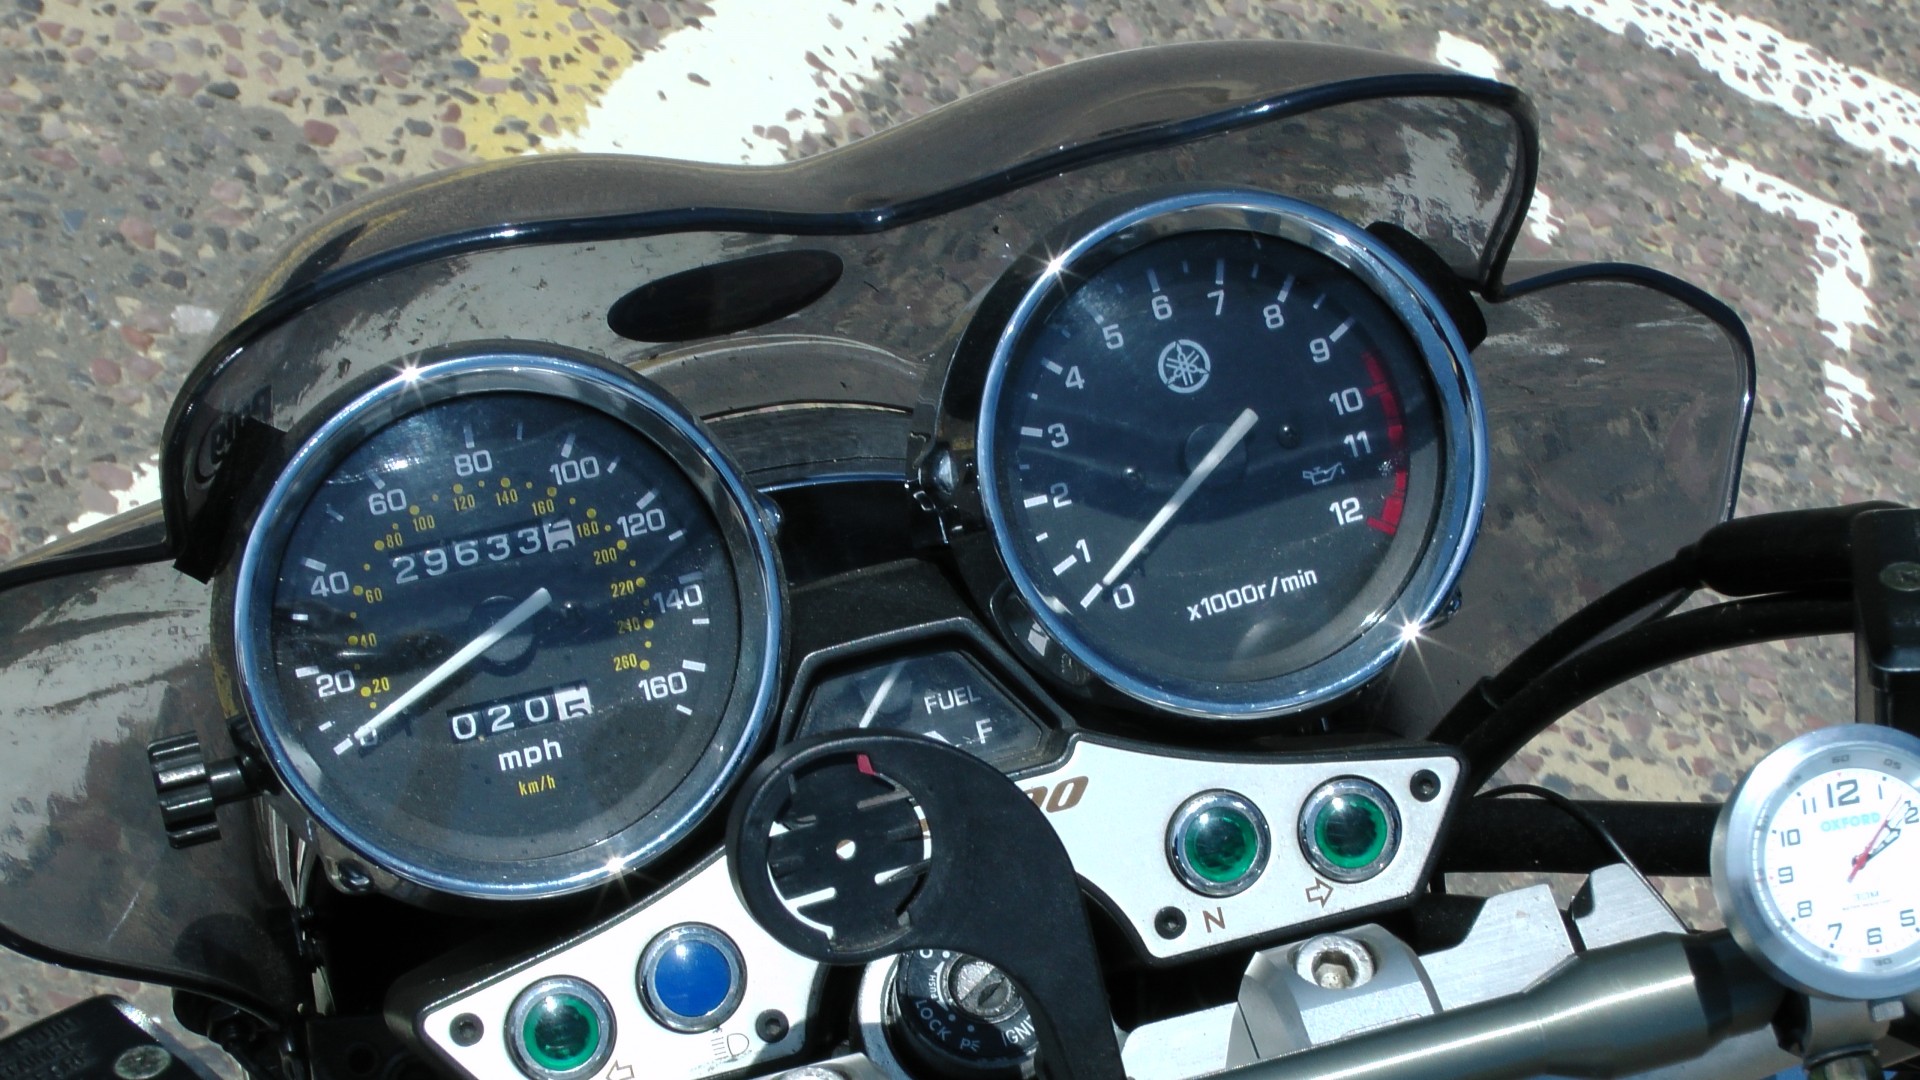 yamaha xjr 1300 motorcycle speedometer rpm counter motorcycle free photo